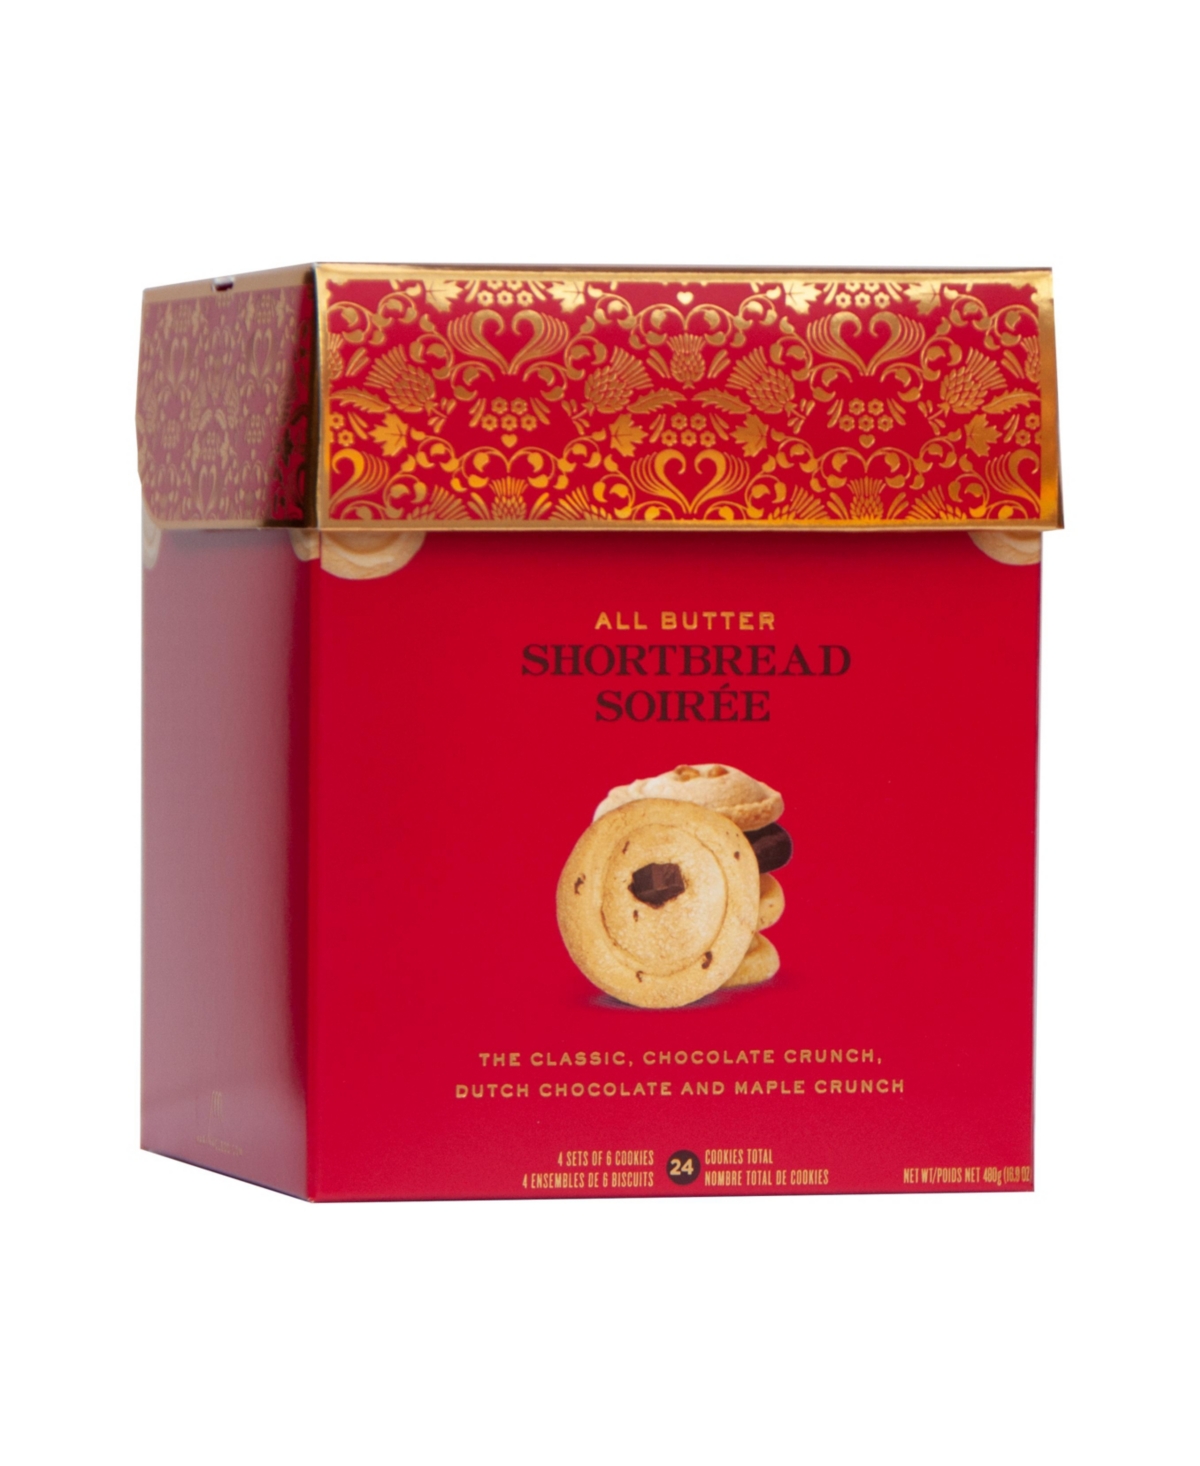 Mary Macleod's Shortbread Large Gift Box Of Assorted Shortbread, 24 Count In Red